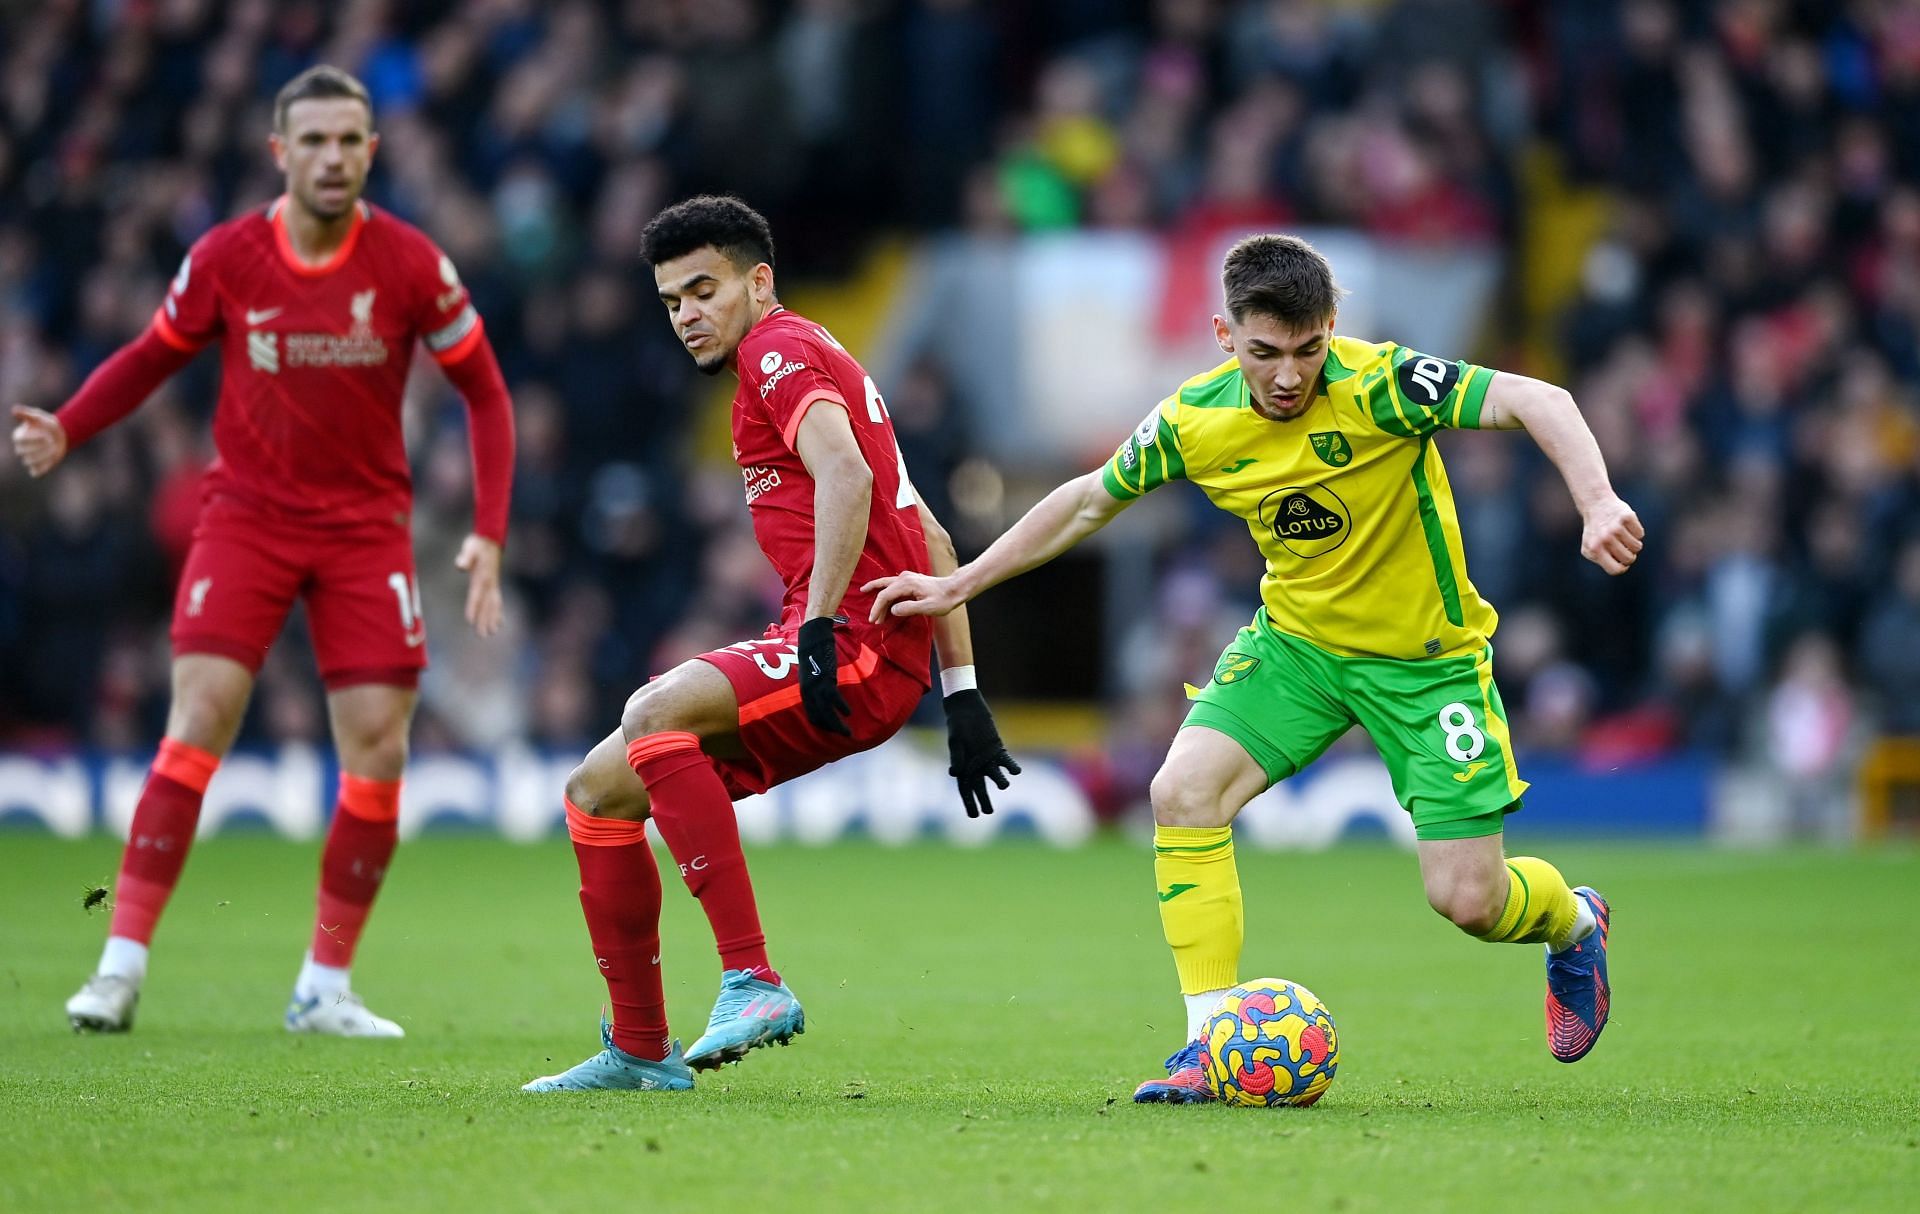 Diaz scored his first goal for the Reds against Norwich as part of a new front three alongside Salah and Mane